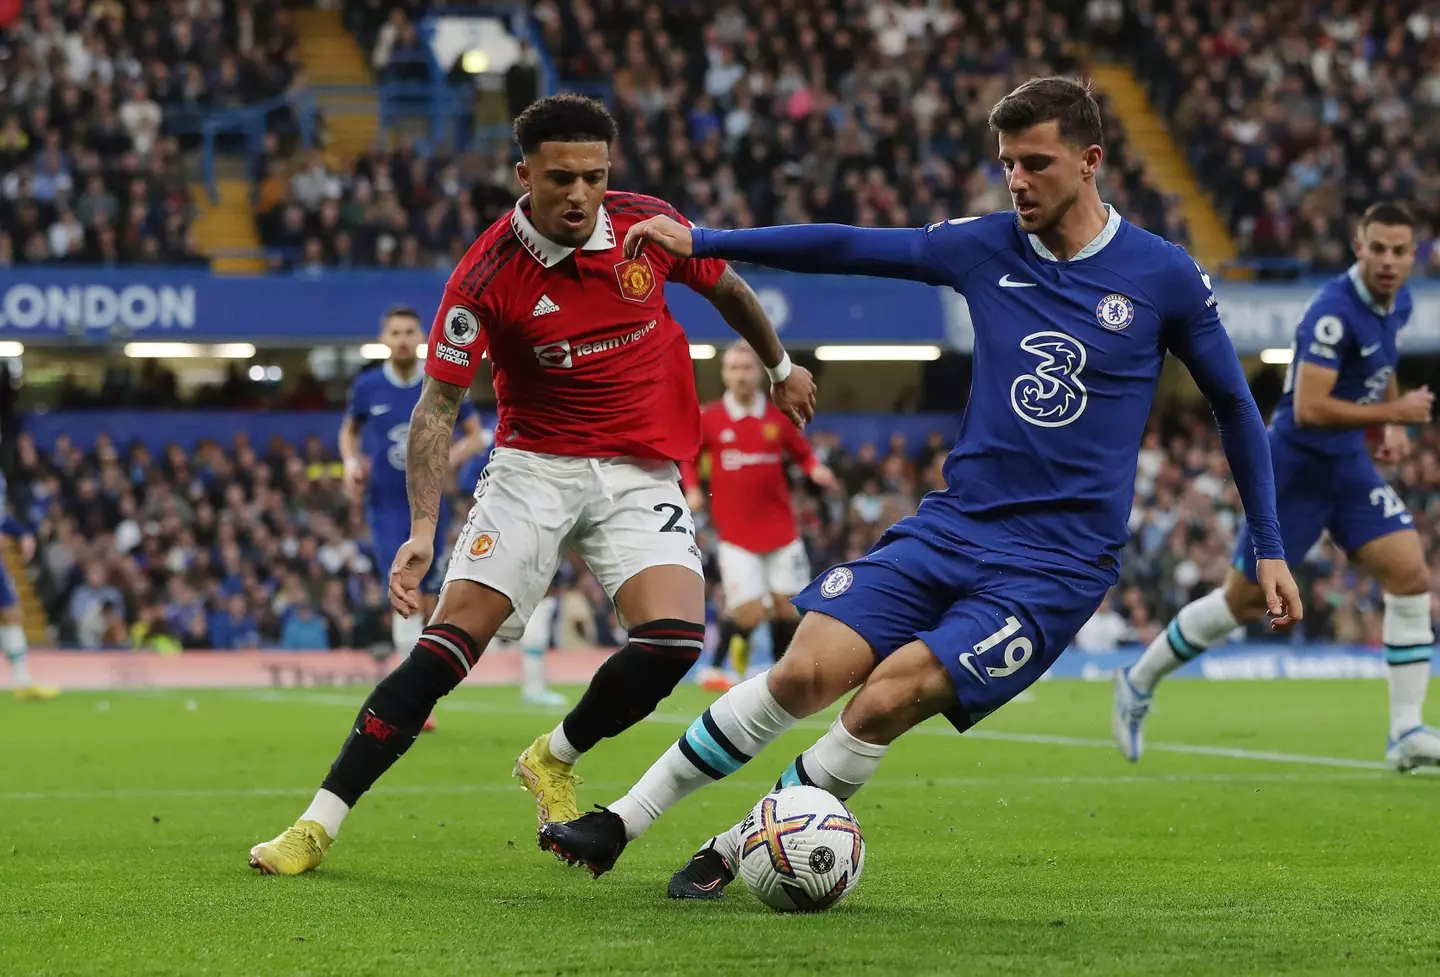 Mason Mount of Chelsea and Jadon Sancho of Manchester United challenge for the ball during the Premier League match at Stamford Bridge. (Alamy)